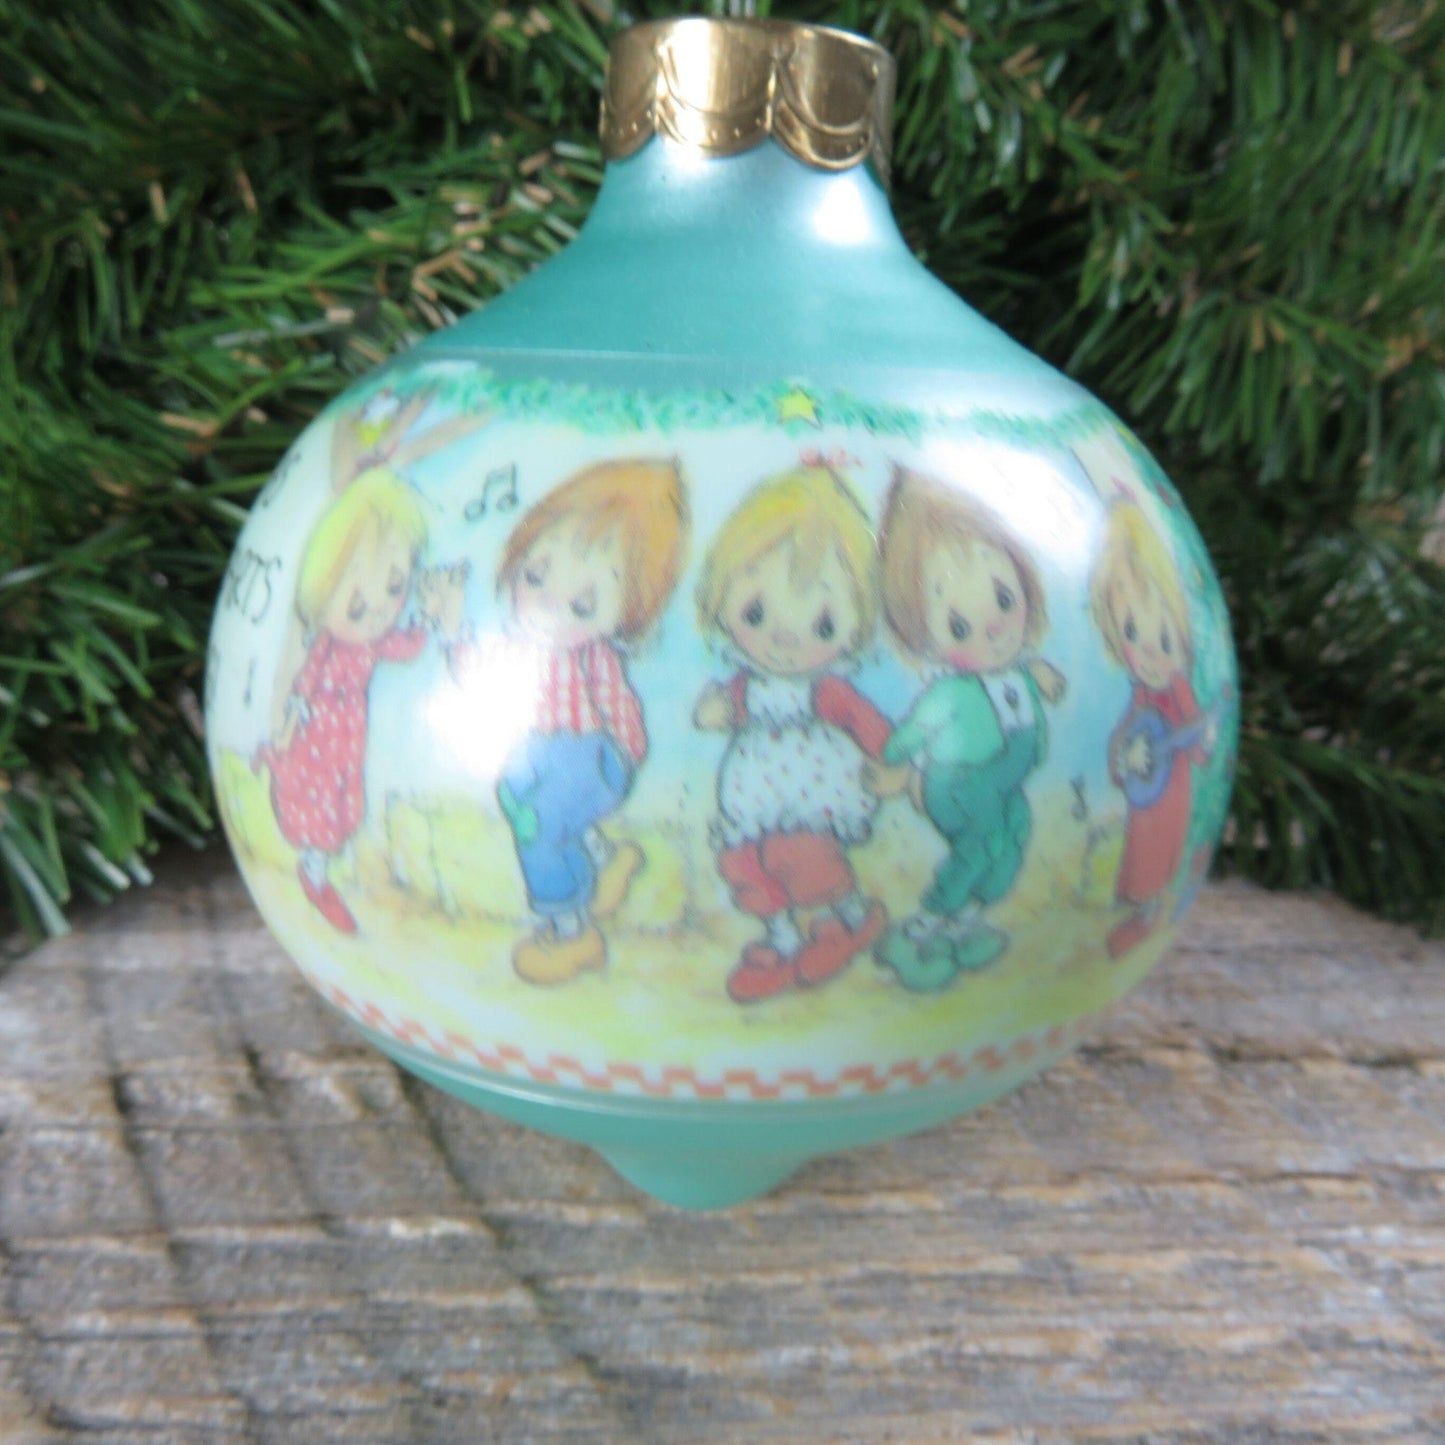 Vintage Betsey's Country Christmas Ornament Pointed Wrapped Ball Hallmark 1992 Betsey Clark